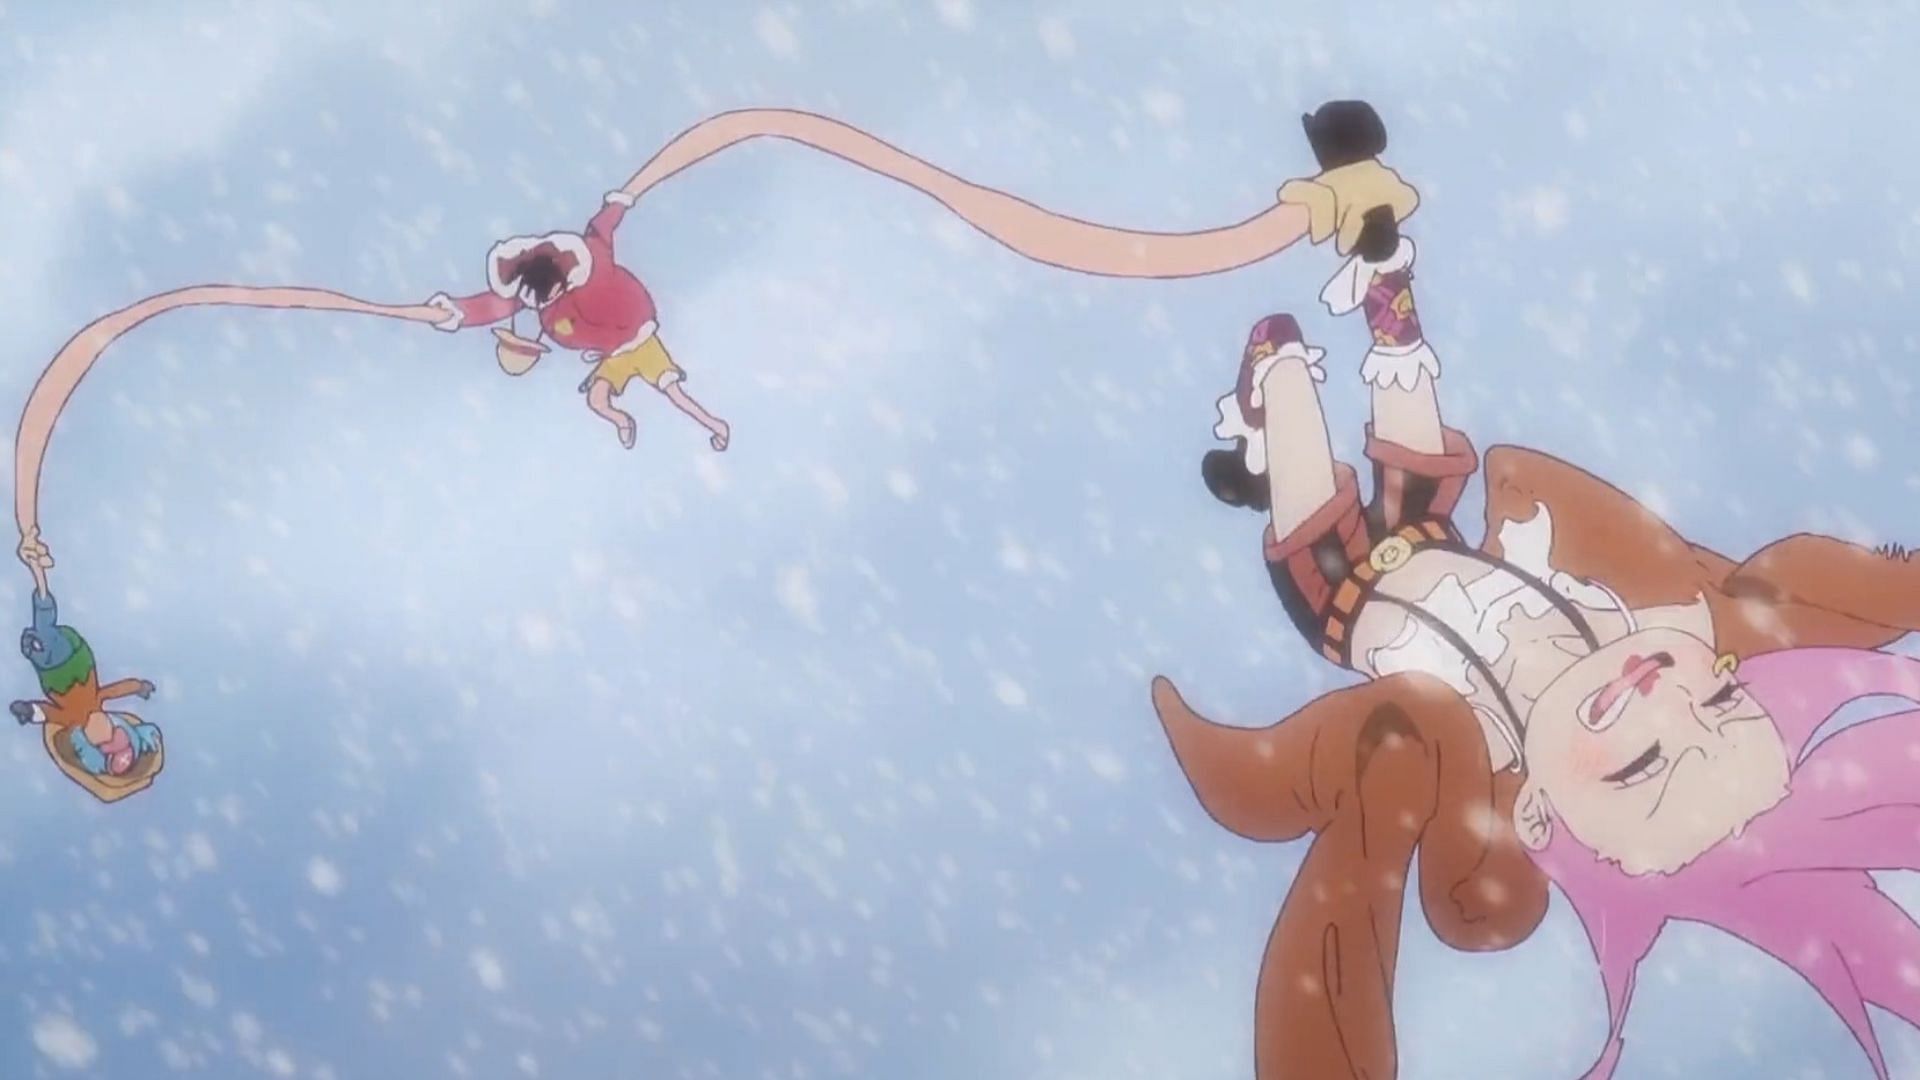 Luffy catches Chopper and Bonney in One Piece episode 1089 (Image via Toei Animation)